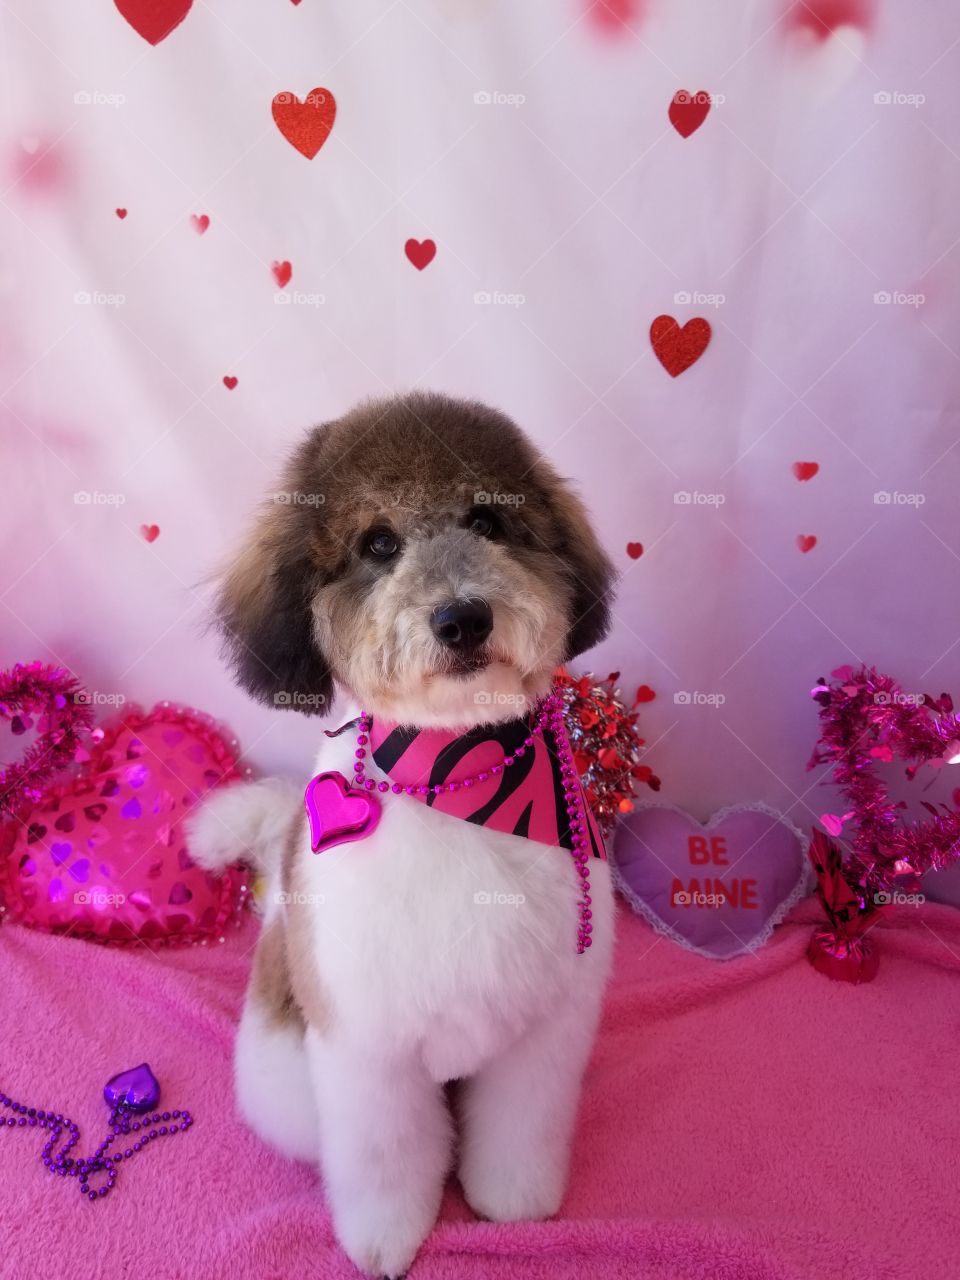 Bernedoodle, the latest fluffy dog breed of choice! ♡